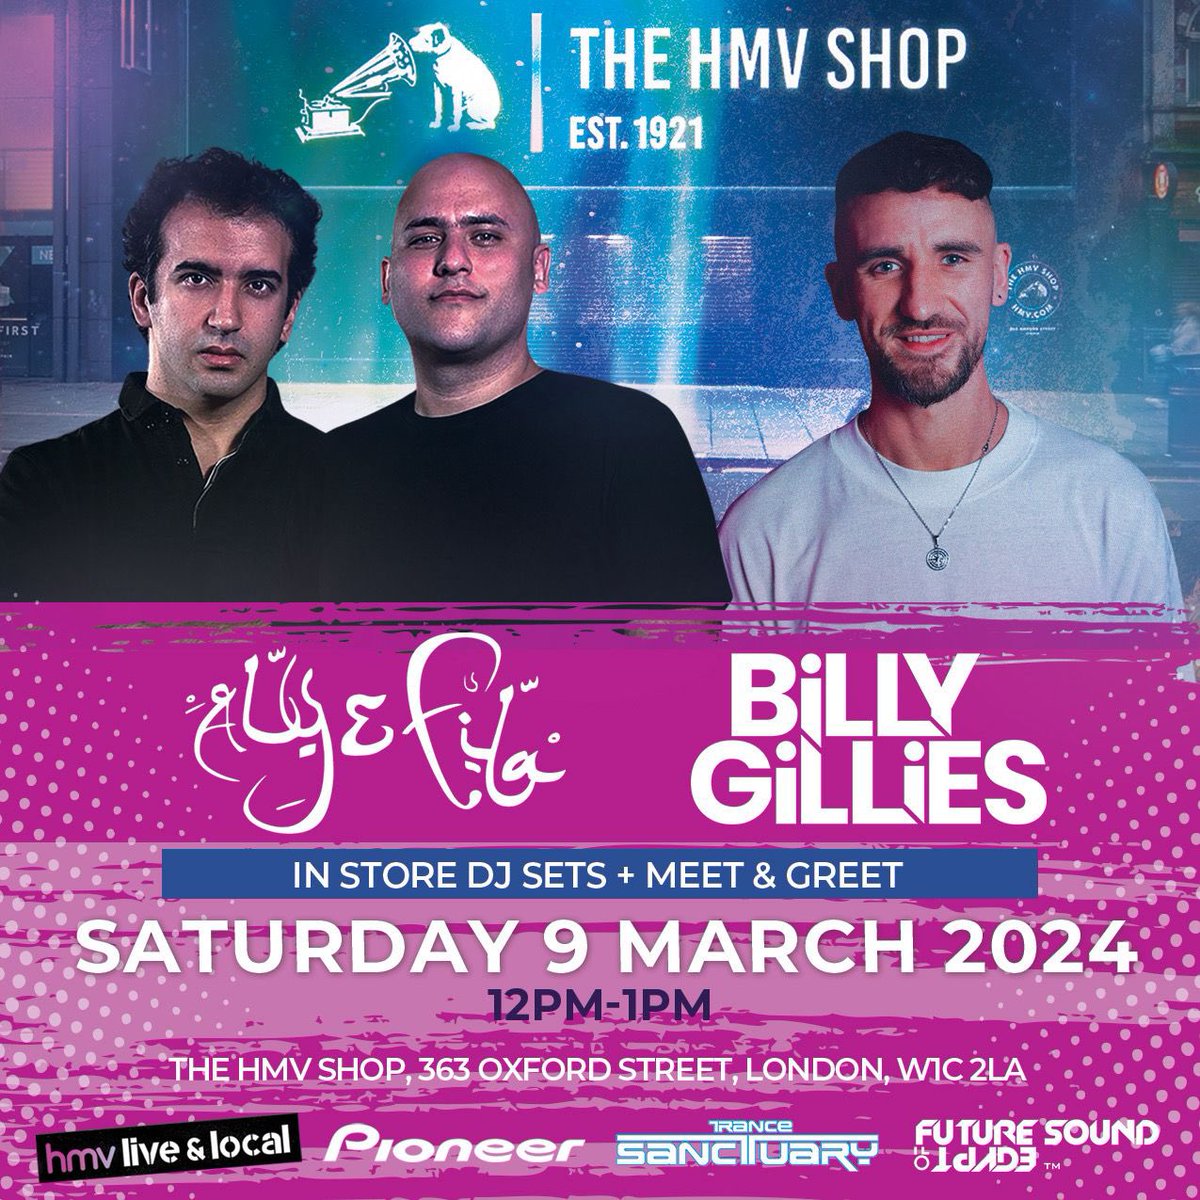 We’ve been really excited to tell you about this one… Billy Gillies and Aly&Fila will be live in the basement from 12pm this Saturday!